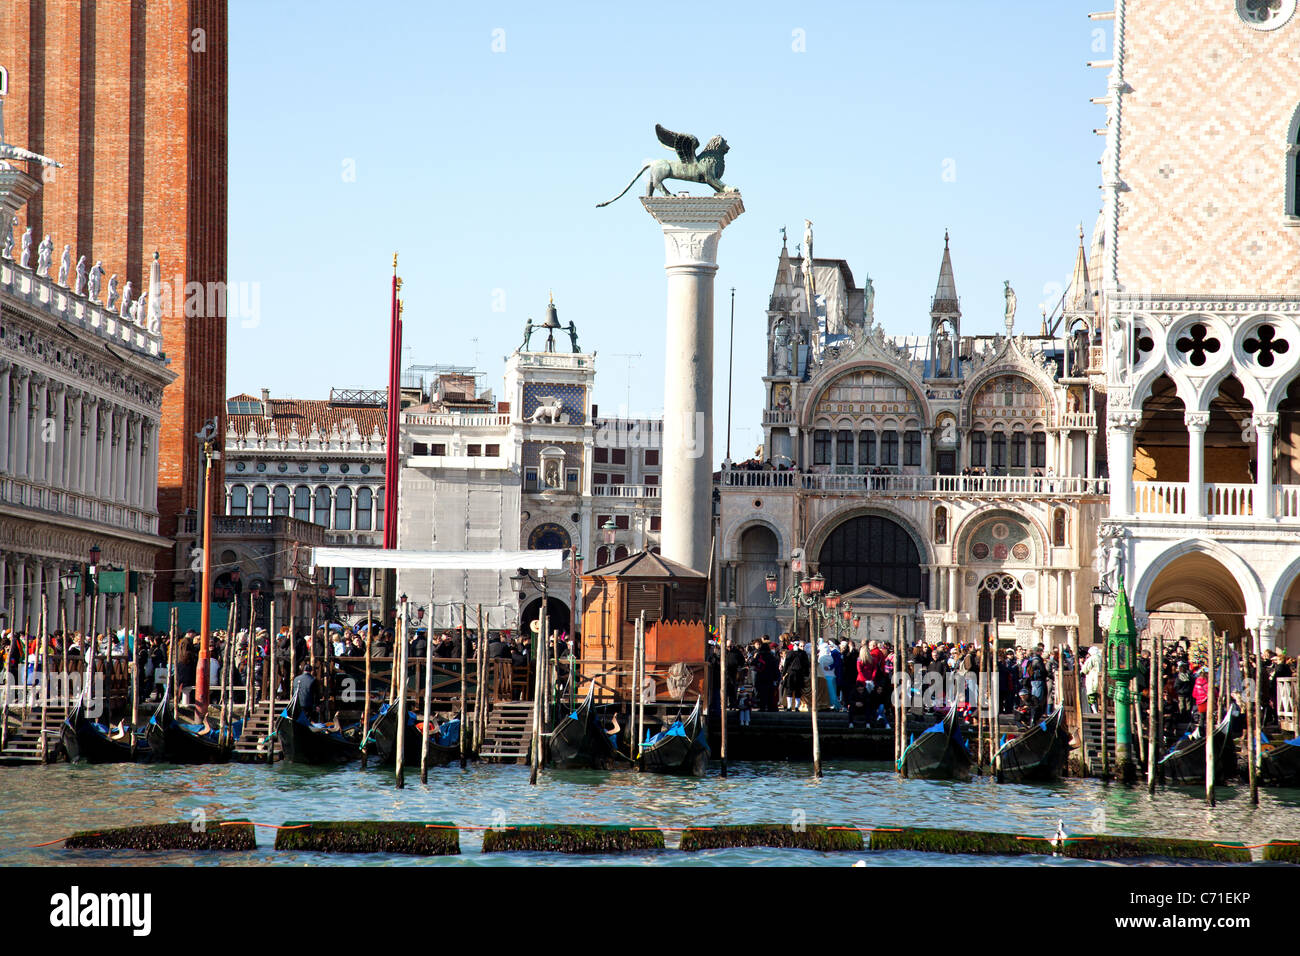 Looking towards Piazza San Marco in Venice Italy Stock Photo